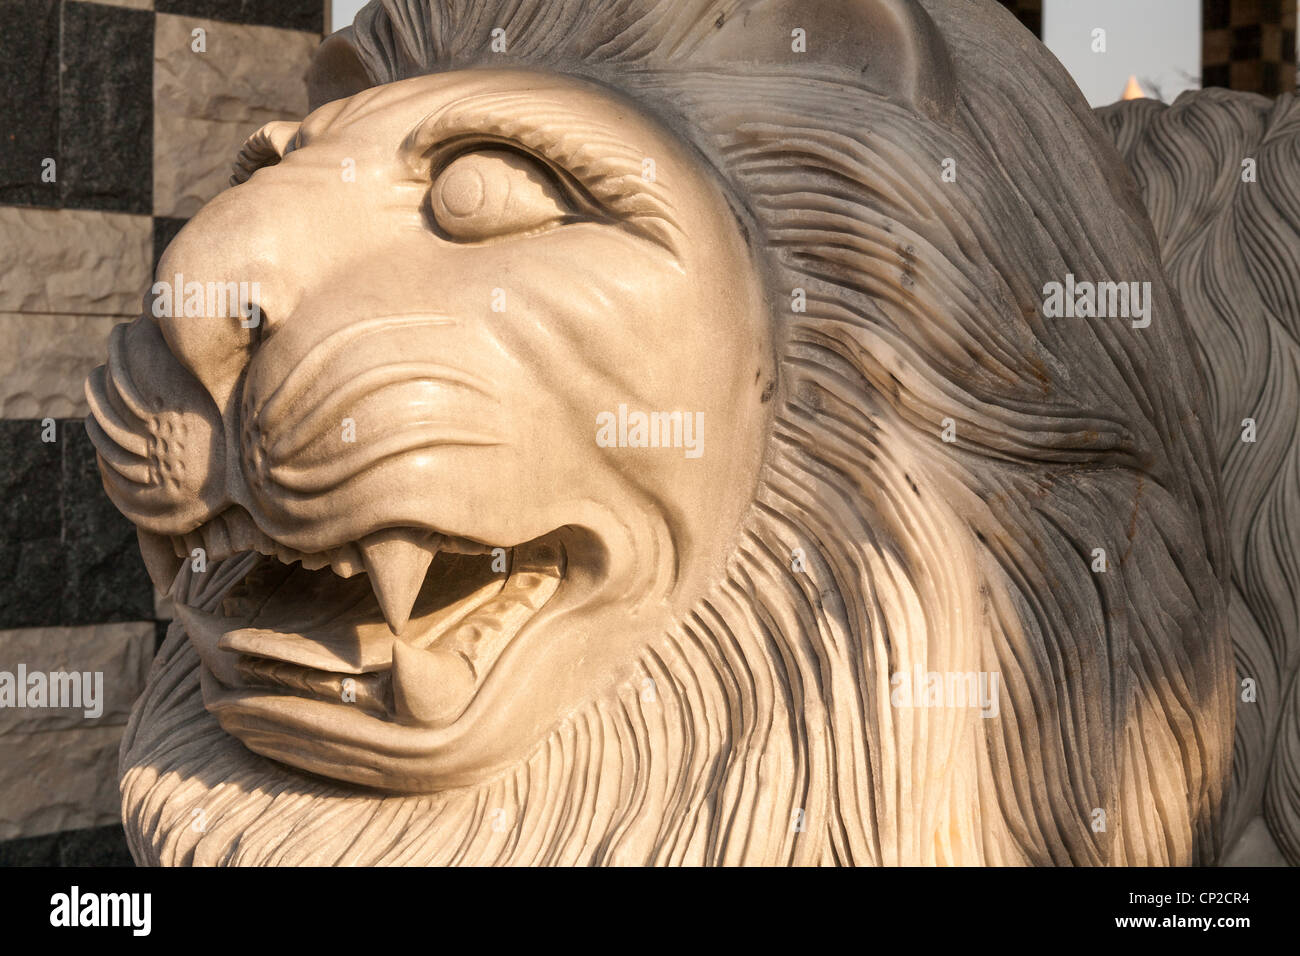 Stone carving of a growling male lion, Danang, Vietnam Stock Photo